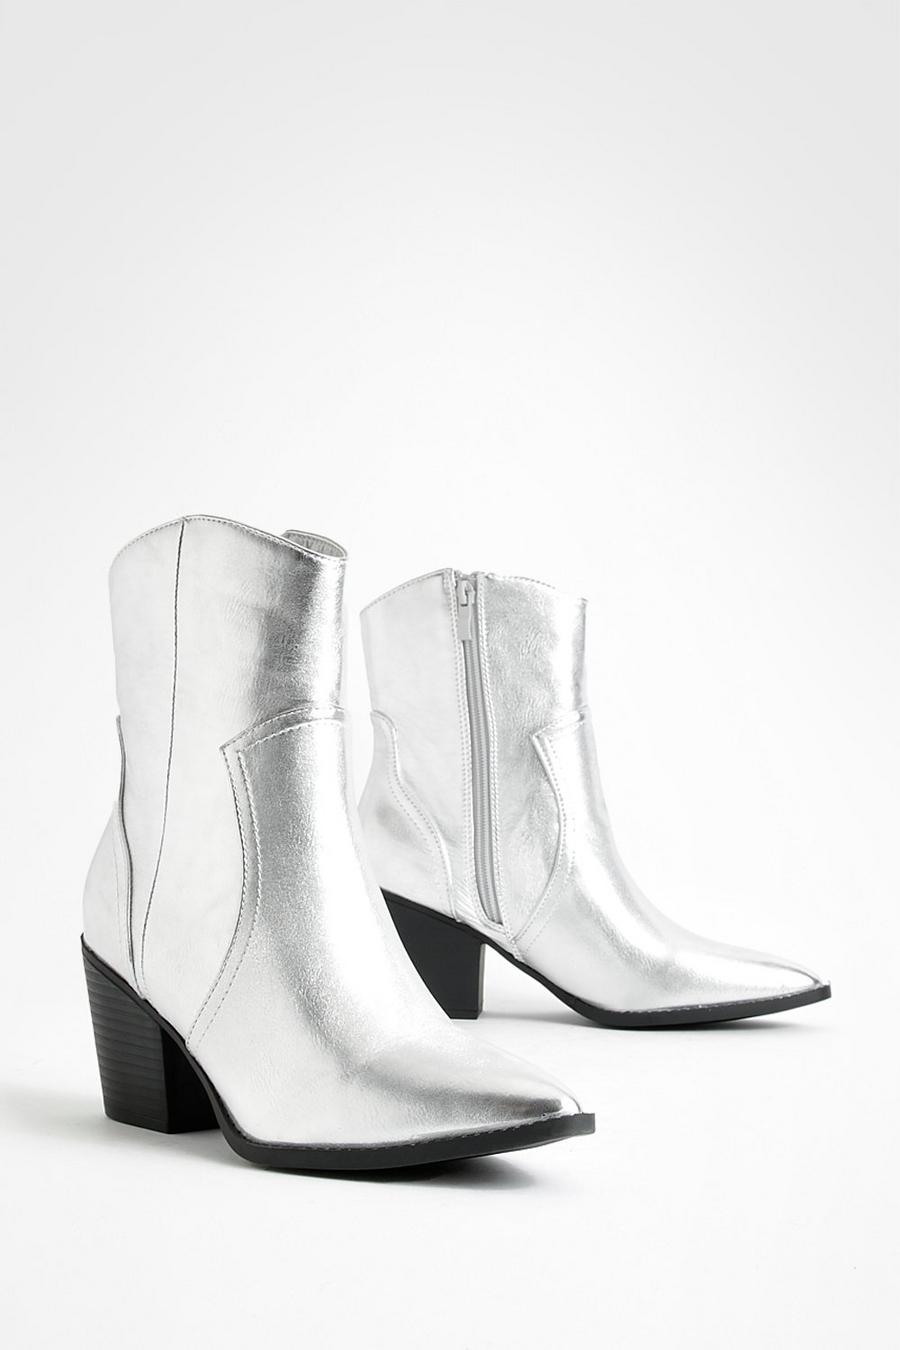 Silver Metallic Western Cowboy Ankle Boots 